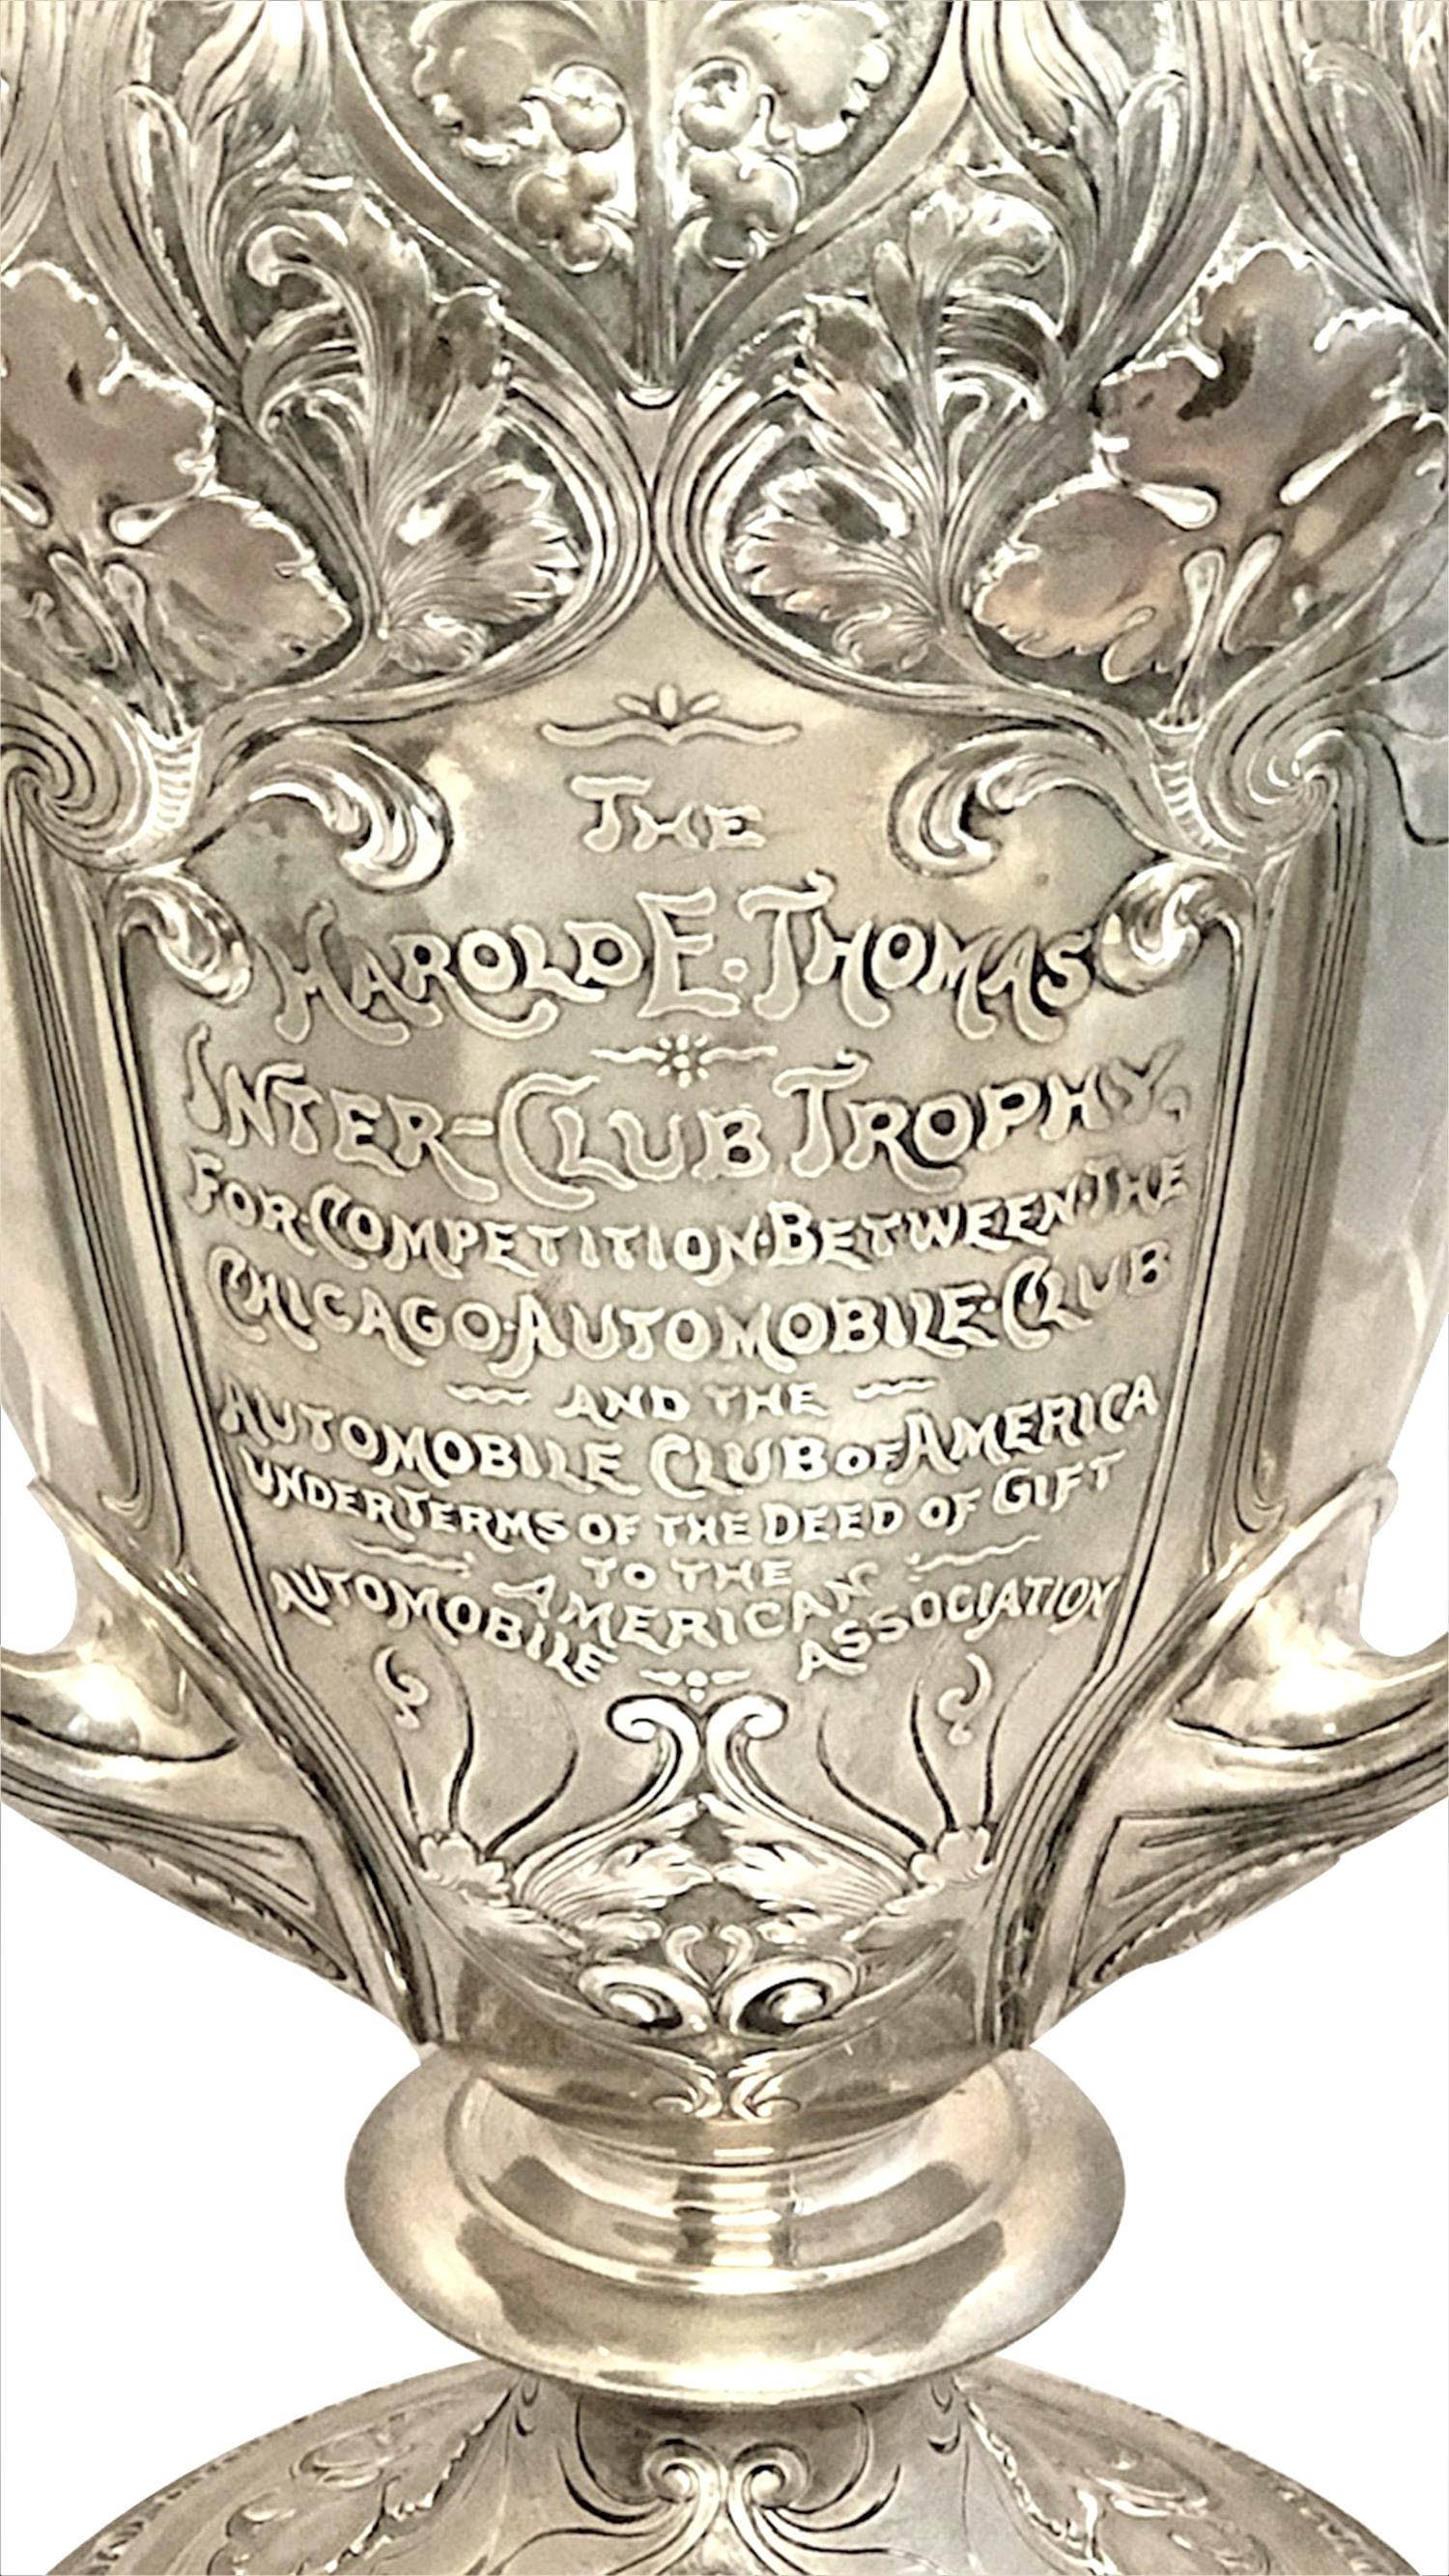 Circa 1905 Sterling Silver Specially made Gorham for Spaulding & Company Athenic,  three handled loving cup trophy, measuring 18 inches in height, 10 inches across the top and weighs 140 ounces. This piece is mostly all hand chased and fabricated